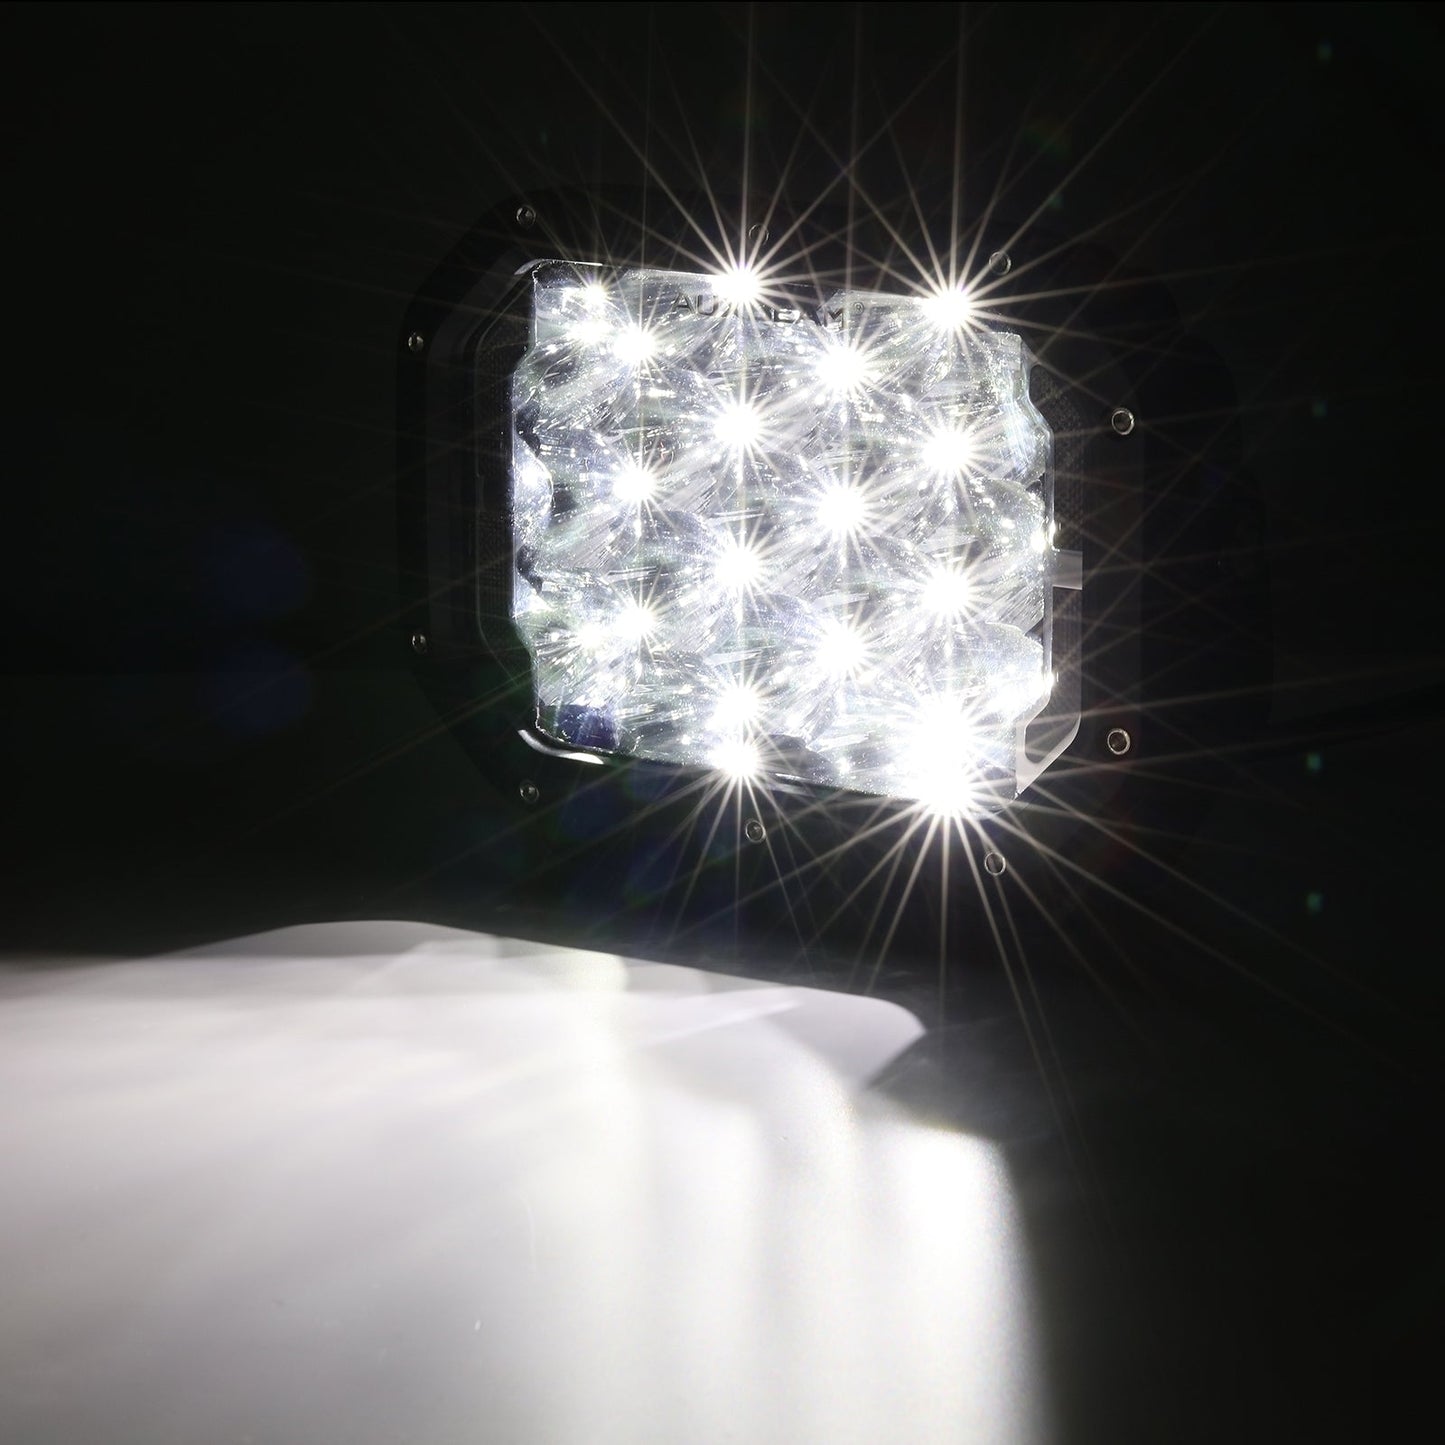 7x5 Inch Rectangle LED Pods White Spot Driving Lights with DRL FOR ATV UTV SIDE BY SIDE 4X4